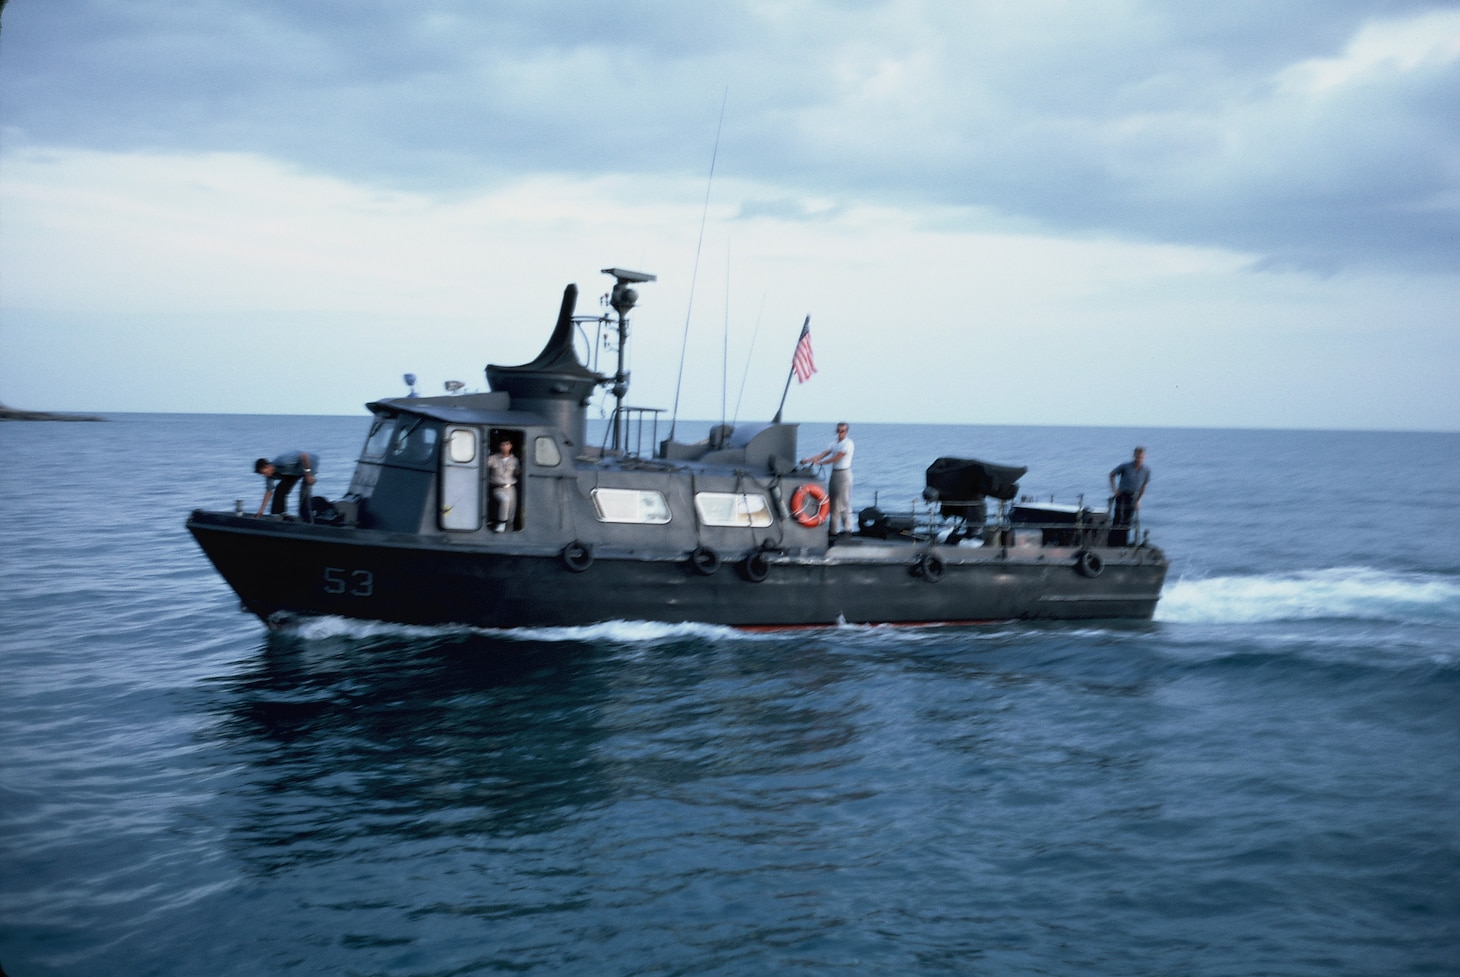 Lt. j.g. William Collins stands aboard patrol craft fast 53 with his crewmates.